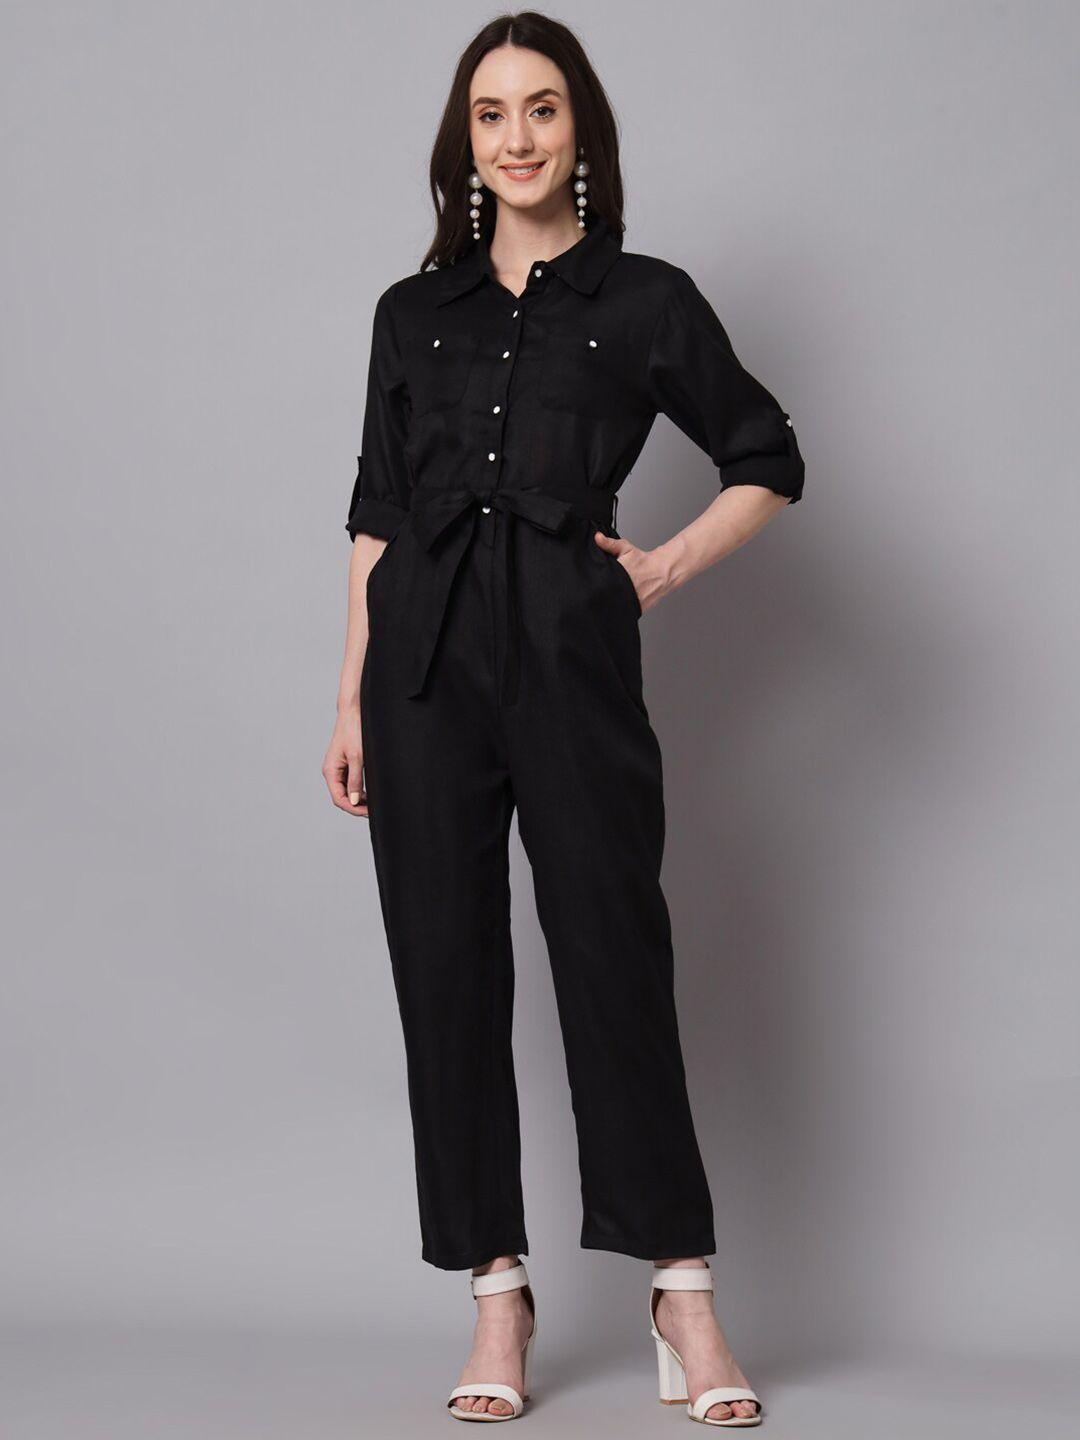 the dry state shirt collar roll up sleeves waist tie ups cotton basic jumpsuit